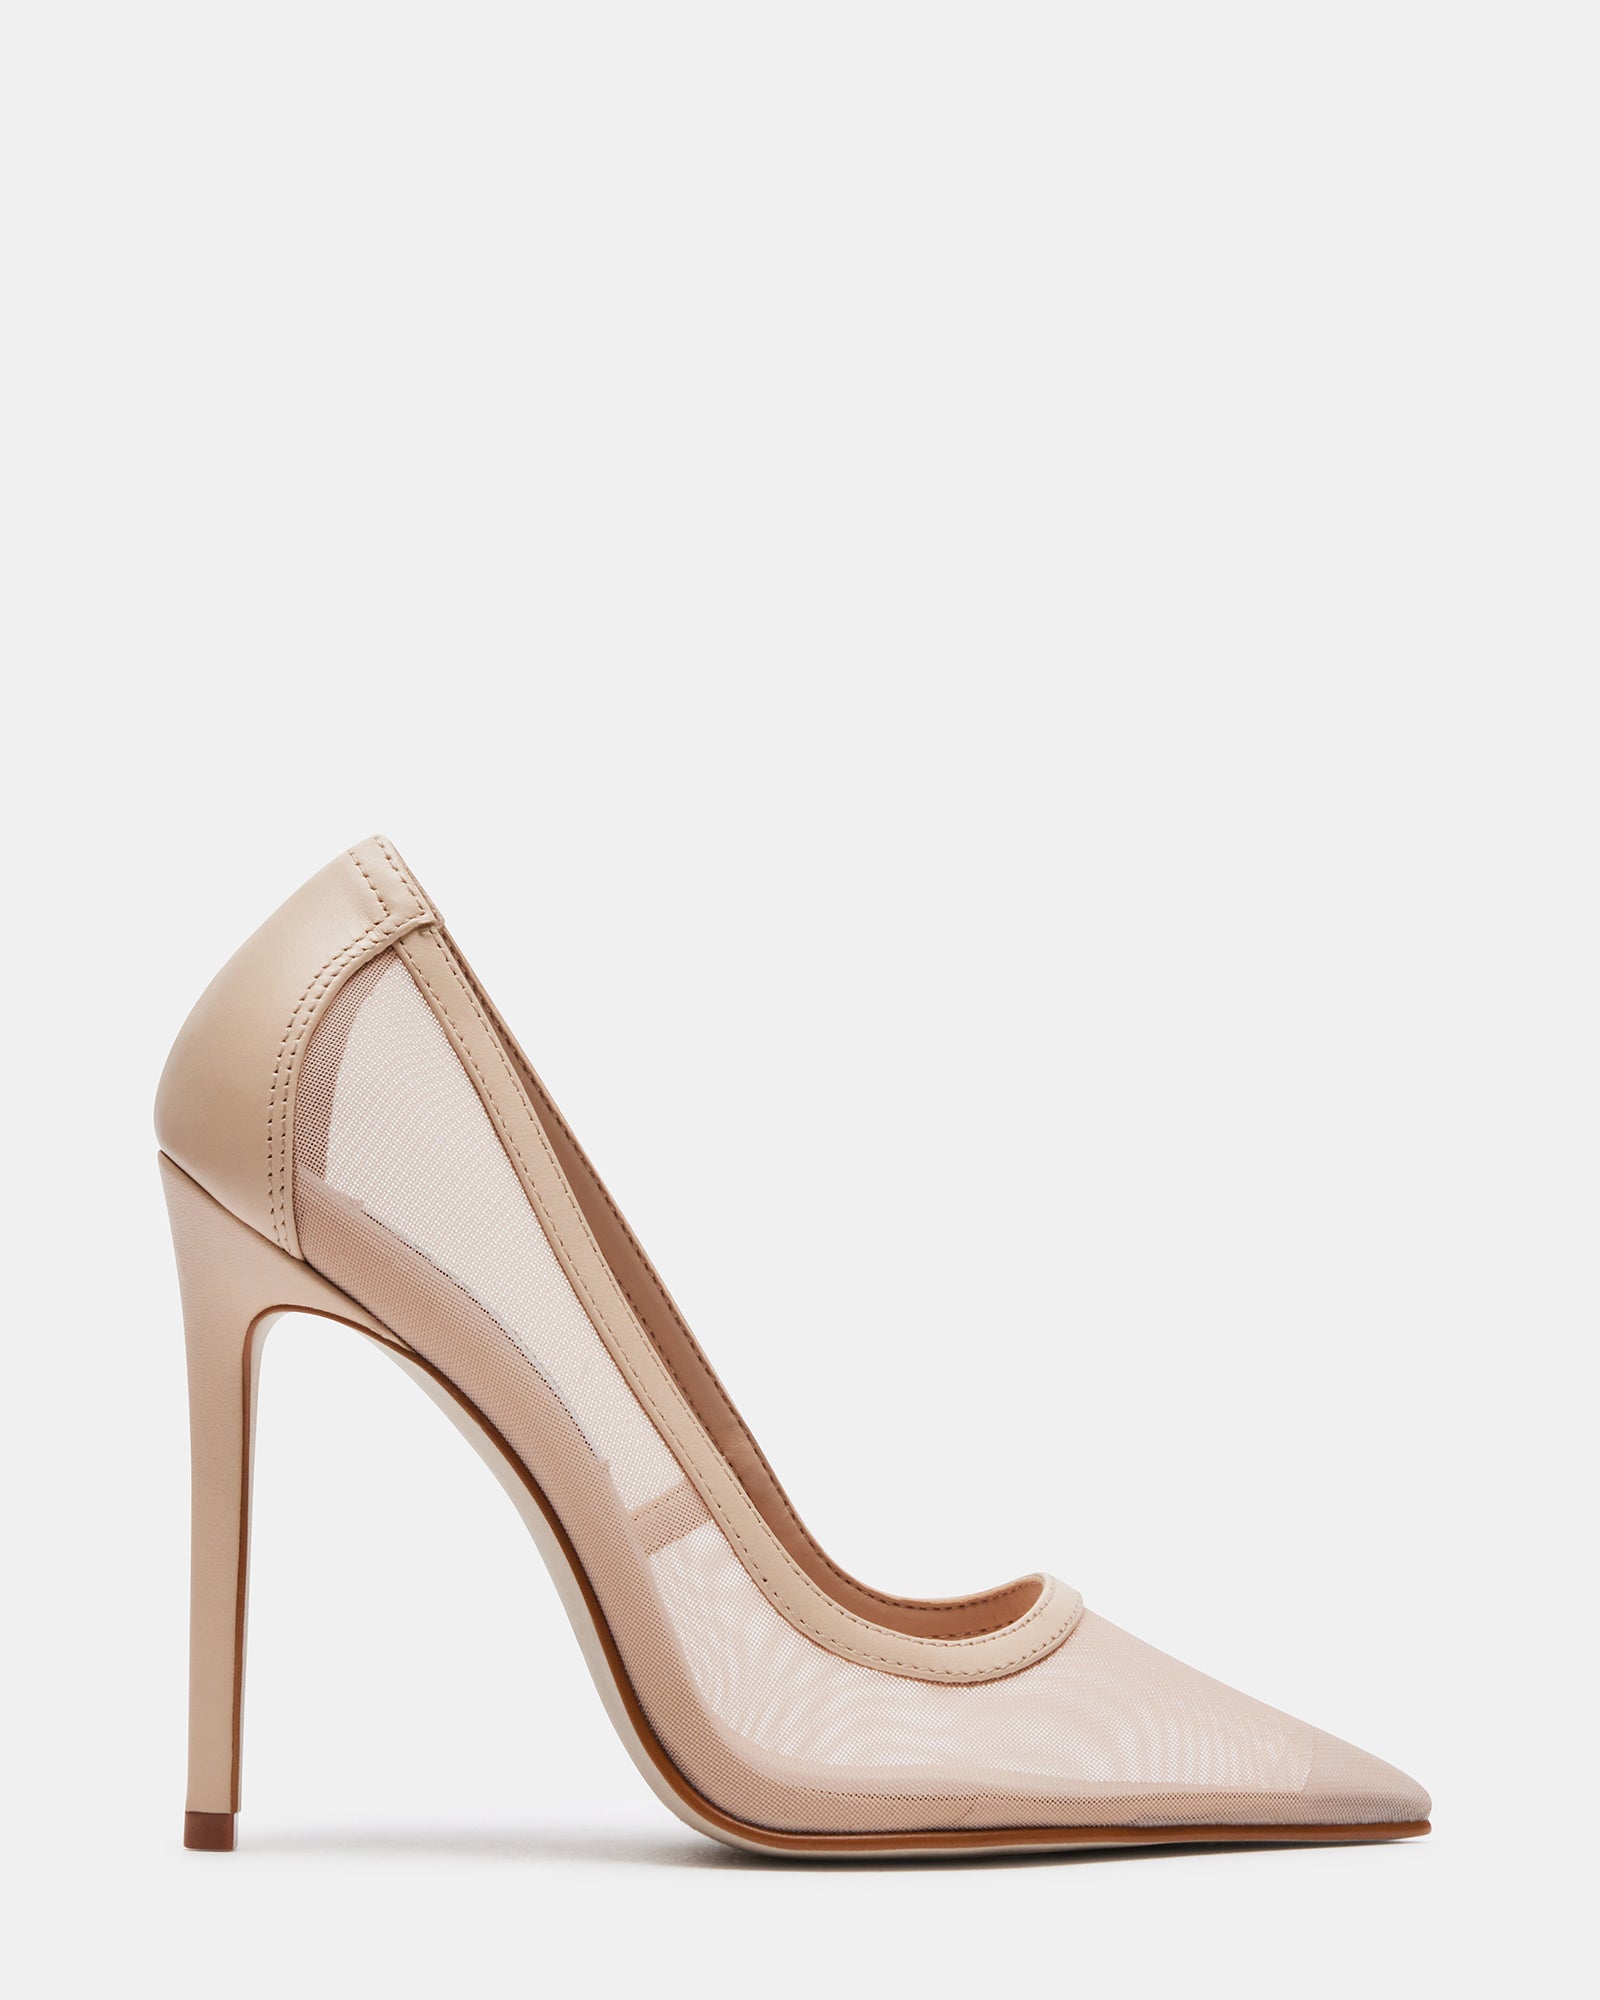 VIRTUE Tan Leather Pointed Toe Stiletto Pump